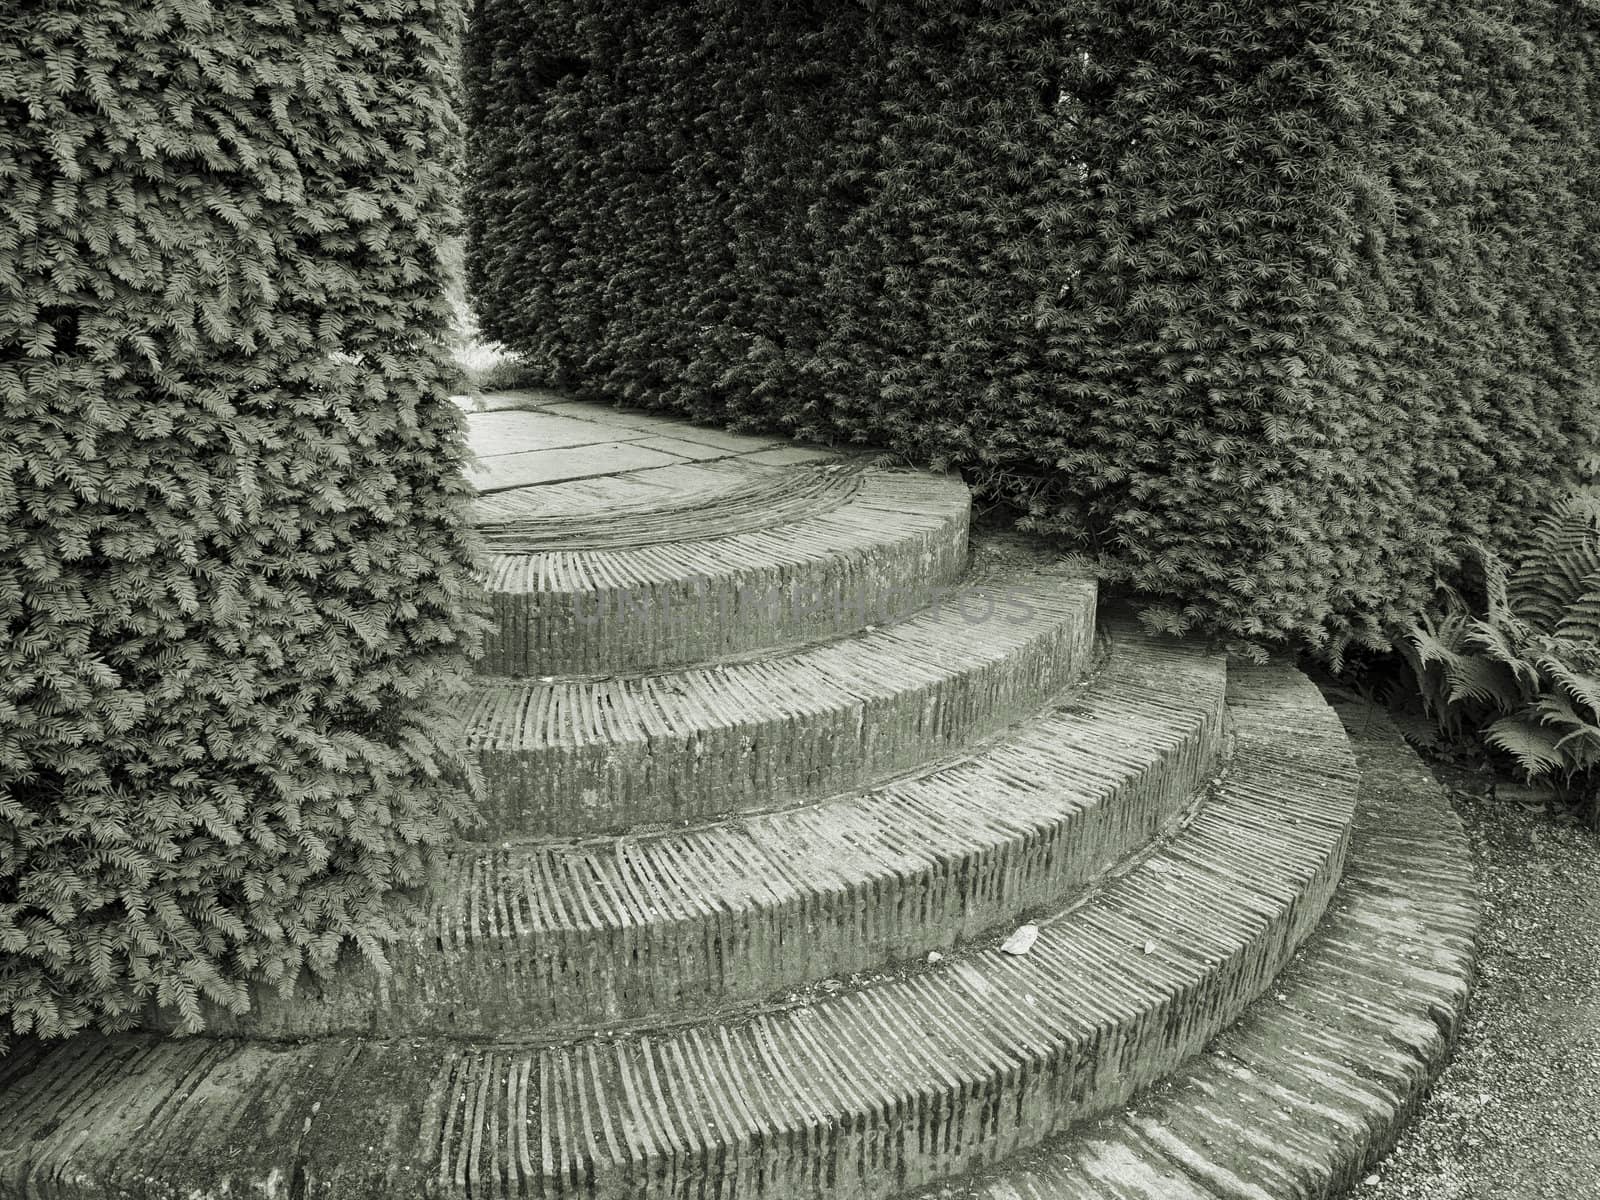 In an English country garden. British garden architecture from the Cotswold area. Monochrome.